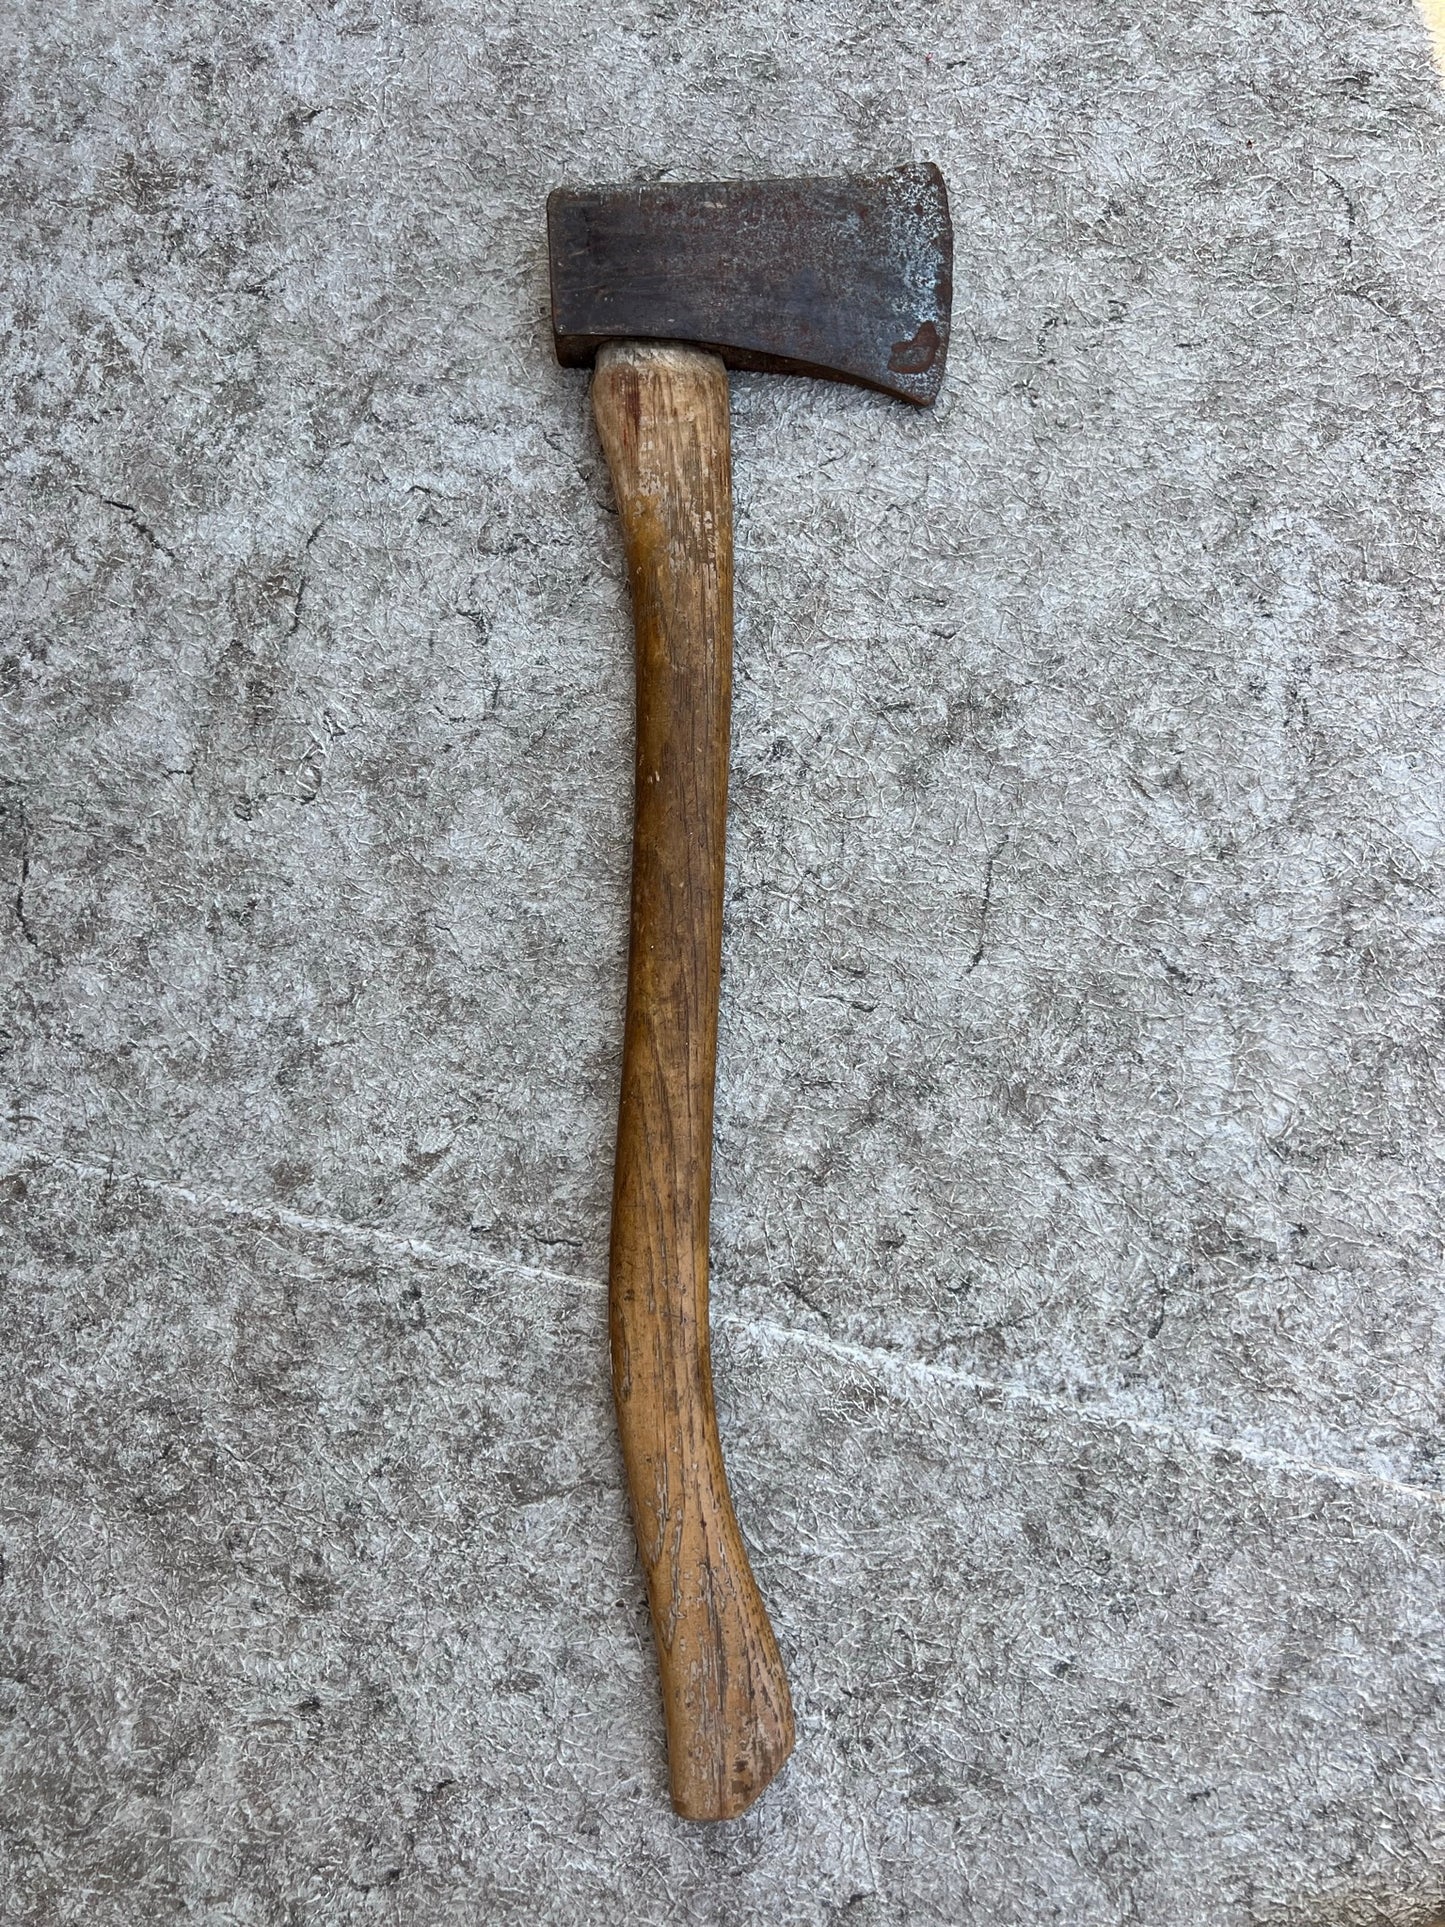 Camping AXE Wood Cutting Splitting Large 24 inch Axe Outstanding Quality